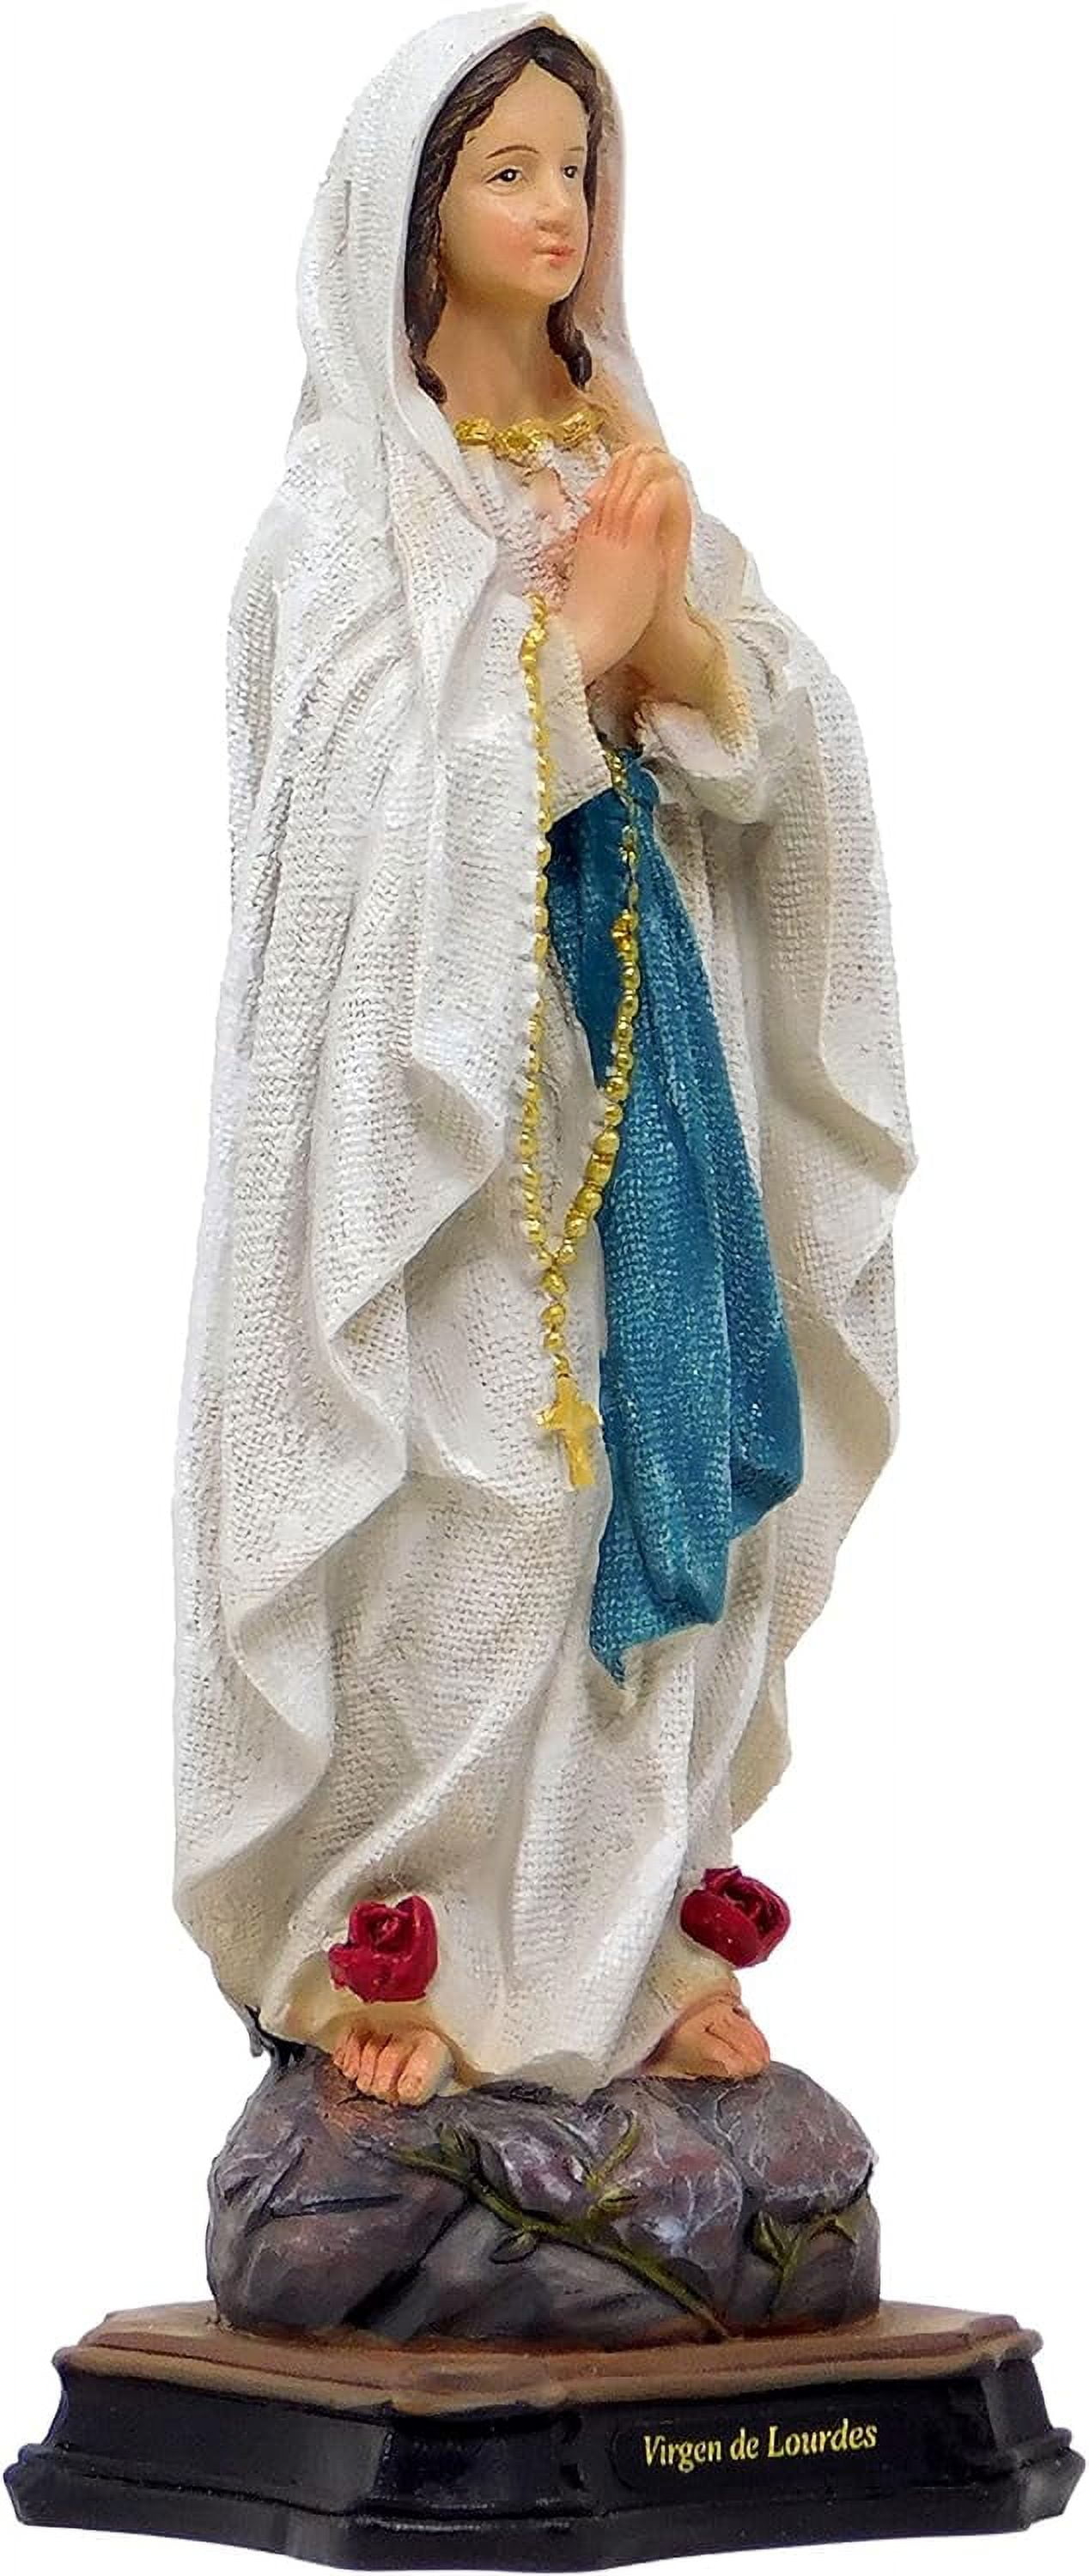 Our Lady Of Lourdes Statue, Finely Detailed Resin, 8 Inch Tall Figurine ...